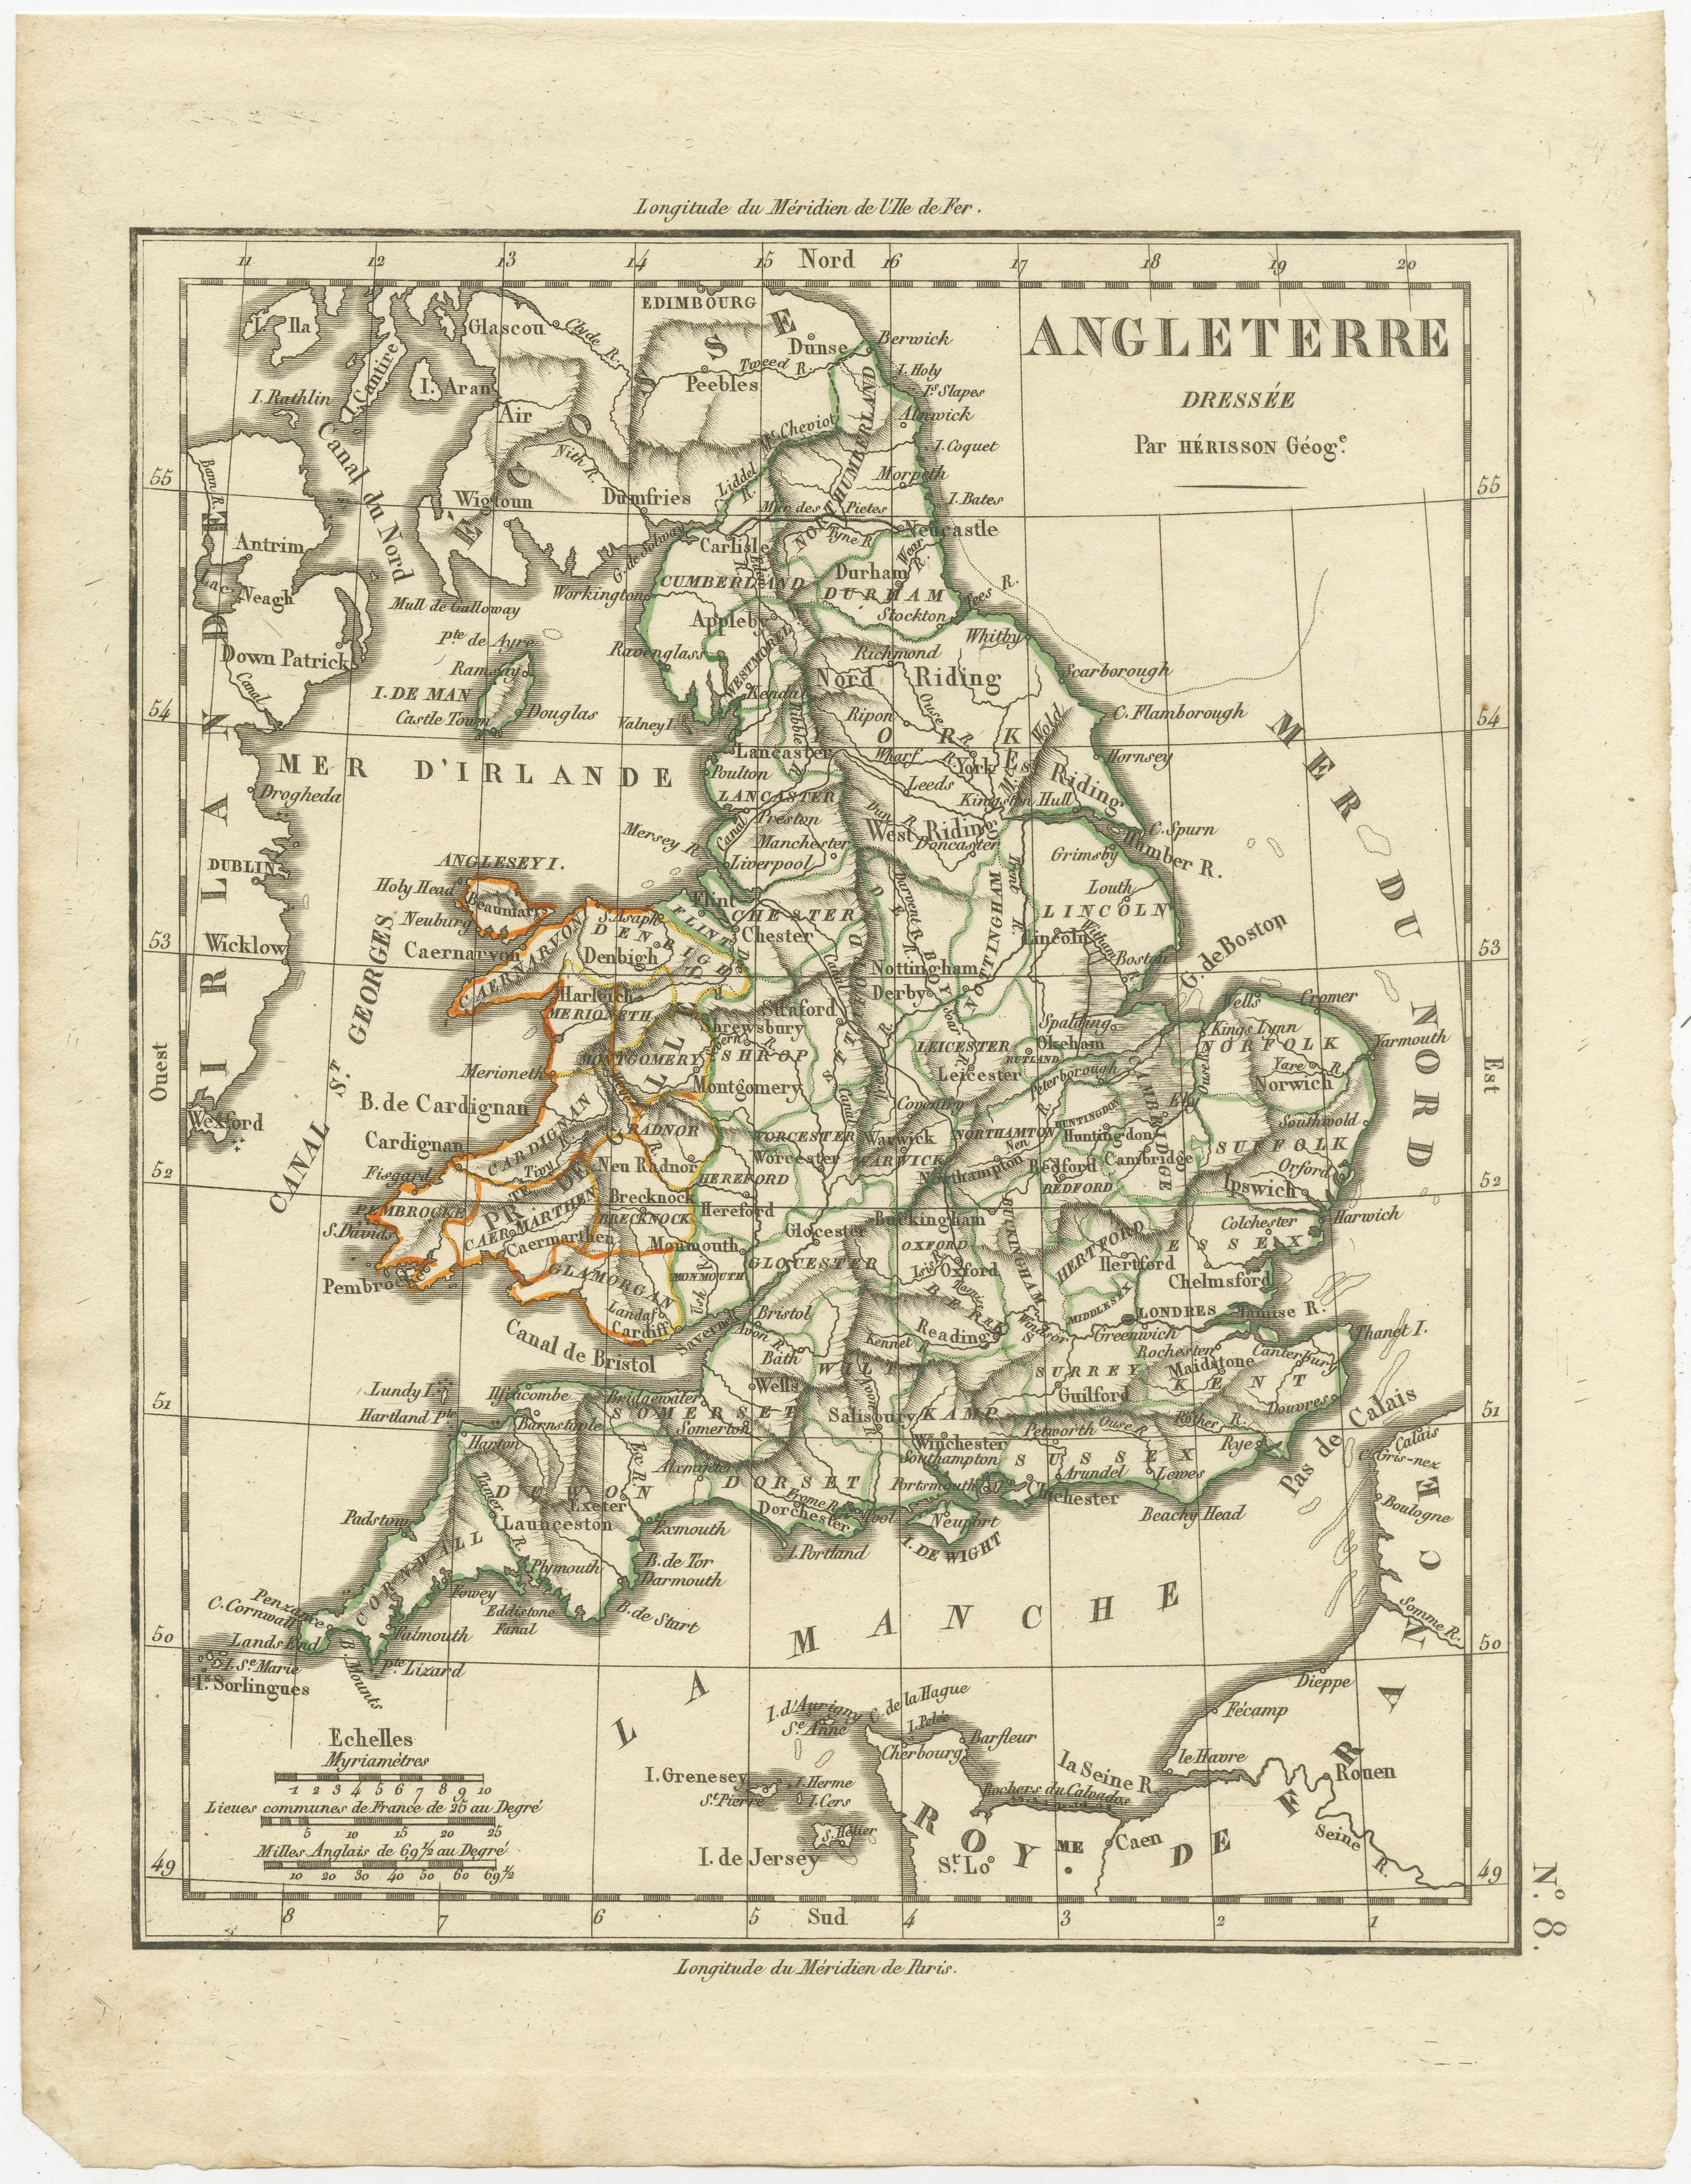 Antique map titled 'Angleterre'. Original old map of England with outline coloring. Source unknown, to be determined. Published circa 1830.